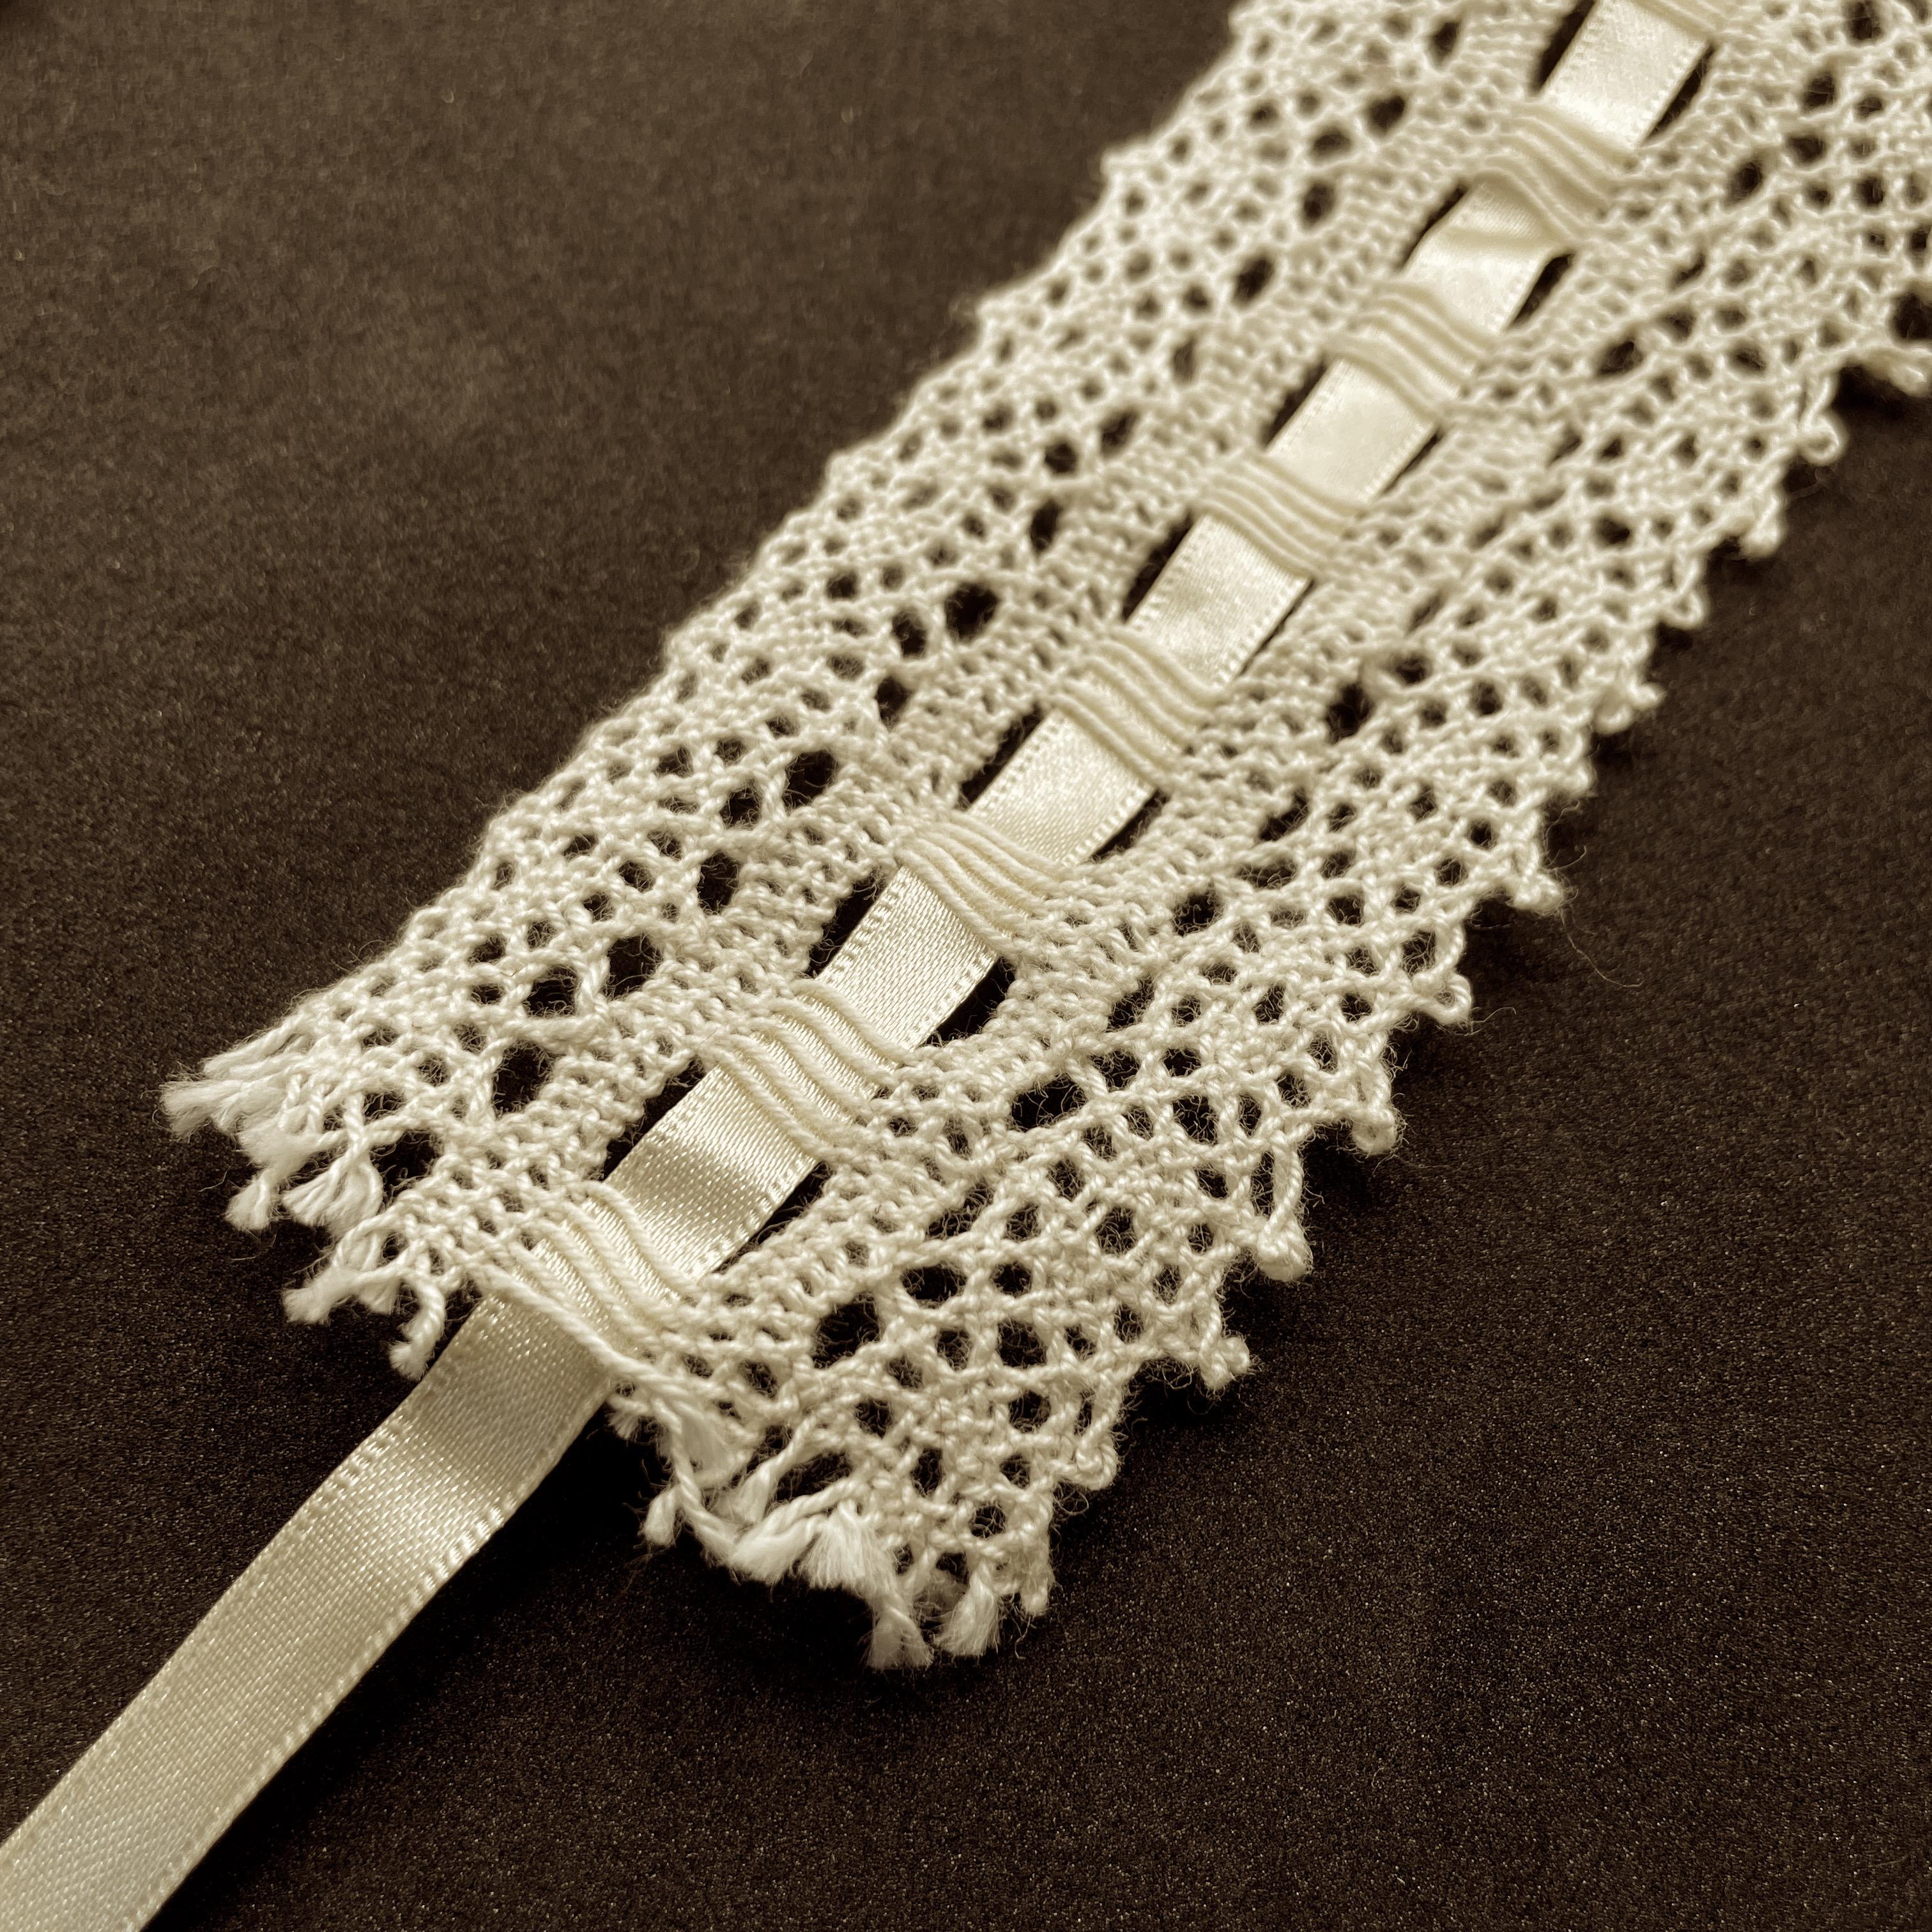 Eyelet Lace - Trim - English - 100% Cotton threaded with Centred